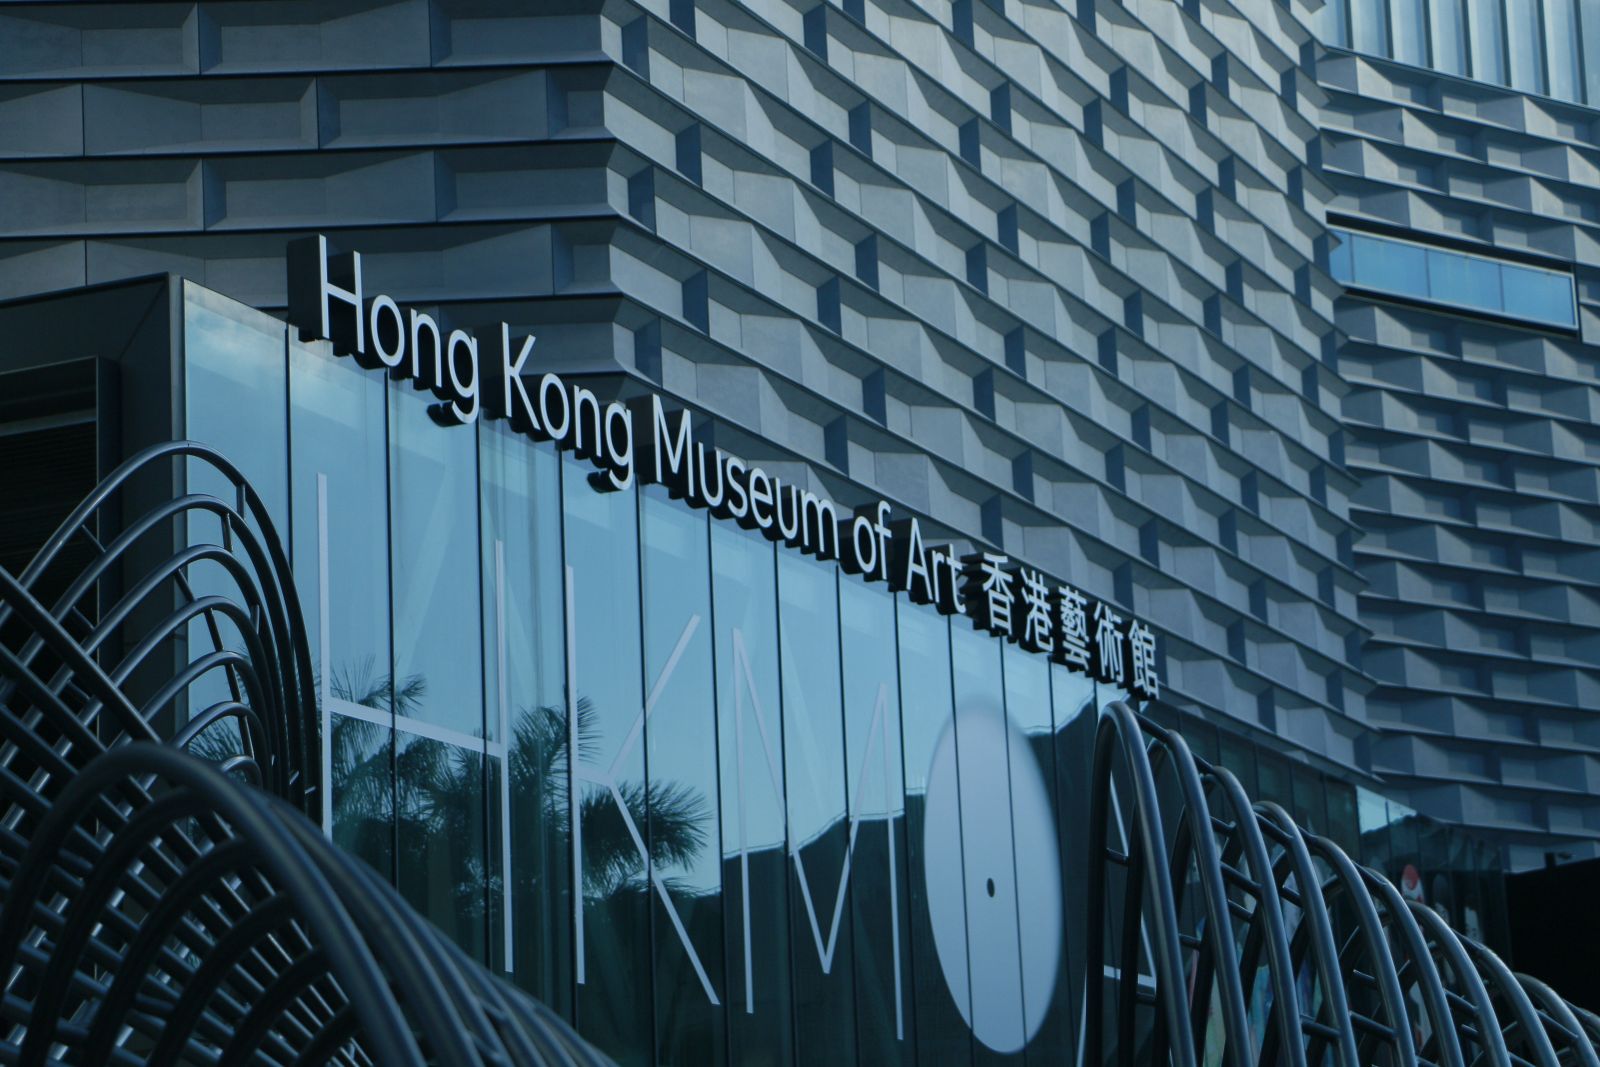 The exterior of the museum mirrors the waves of Victoria Harbour